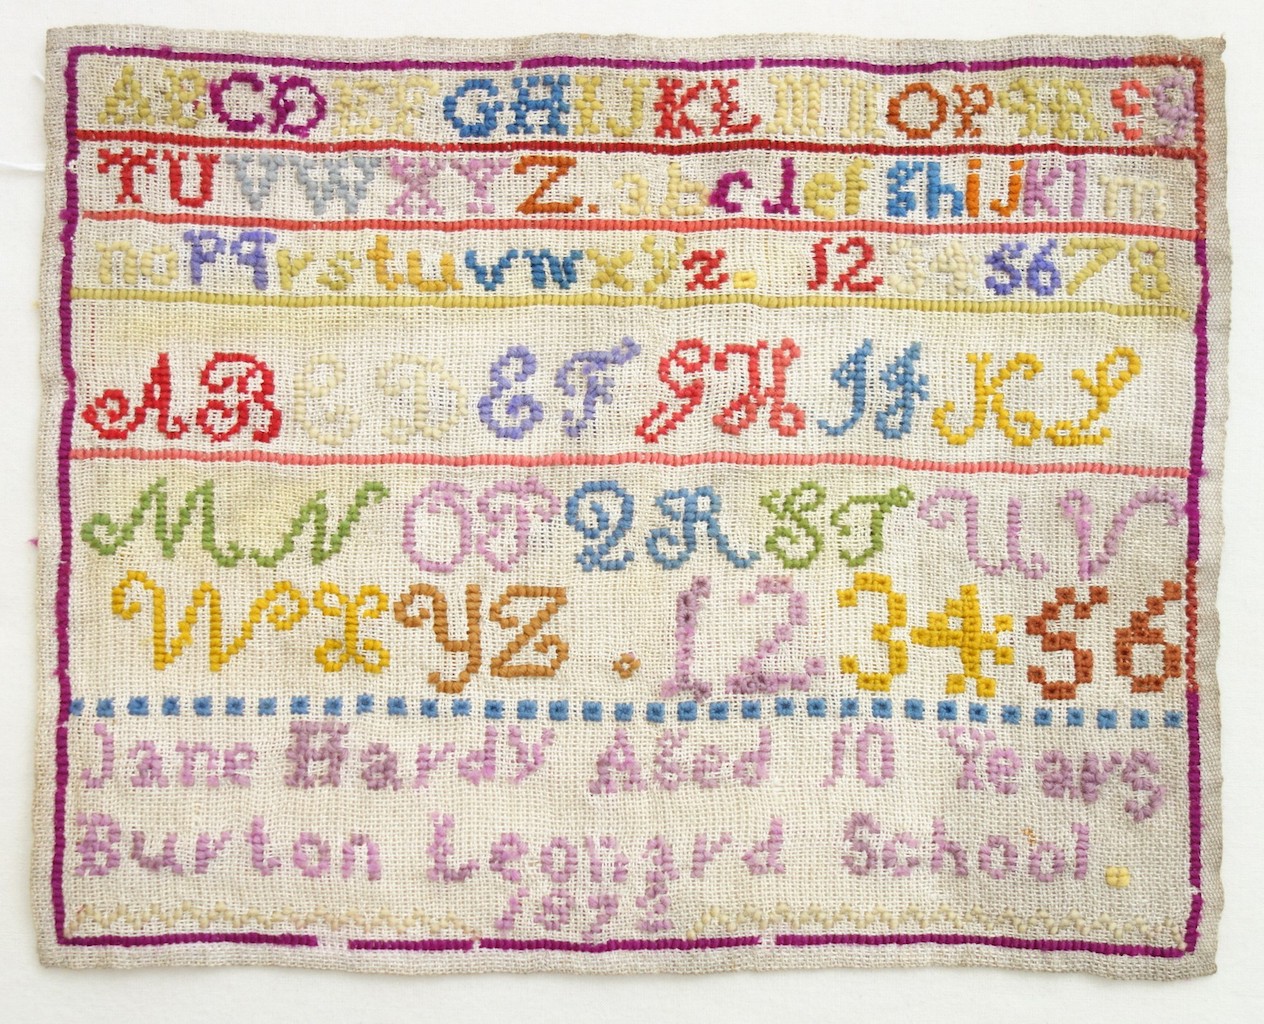 Jane Hardy's sampler, worked in 1872 when she was ten years old (TRC 2020.1606).